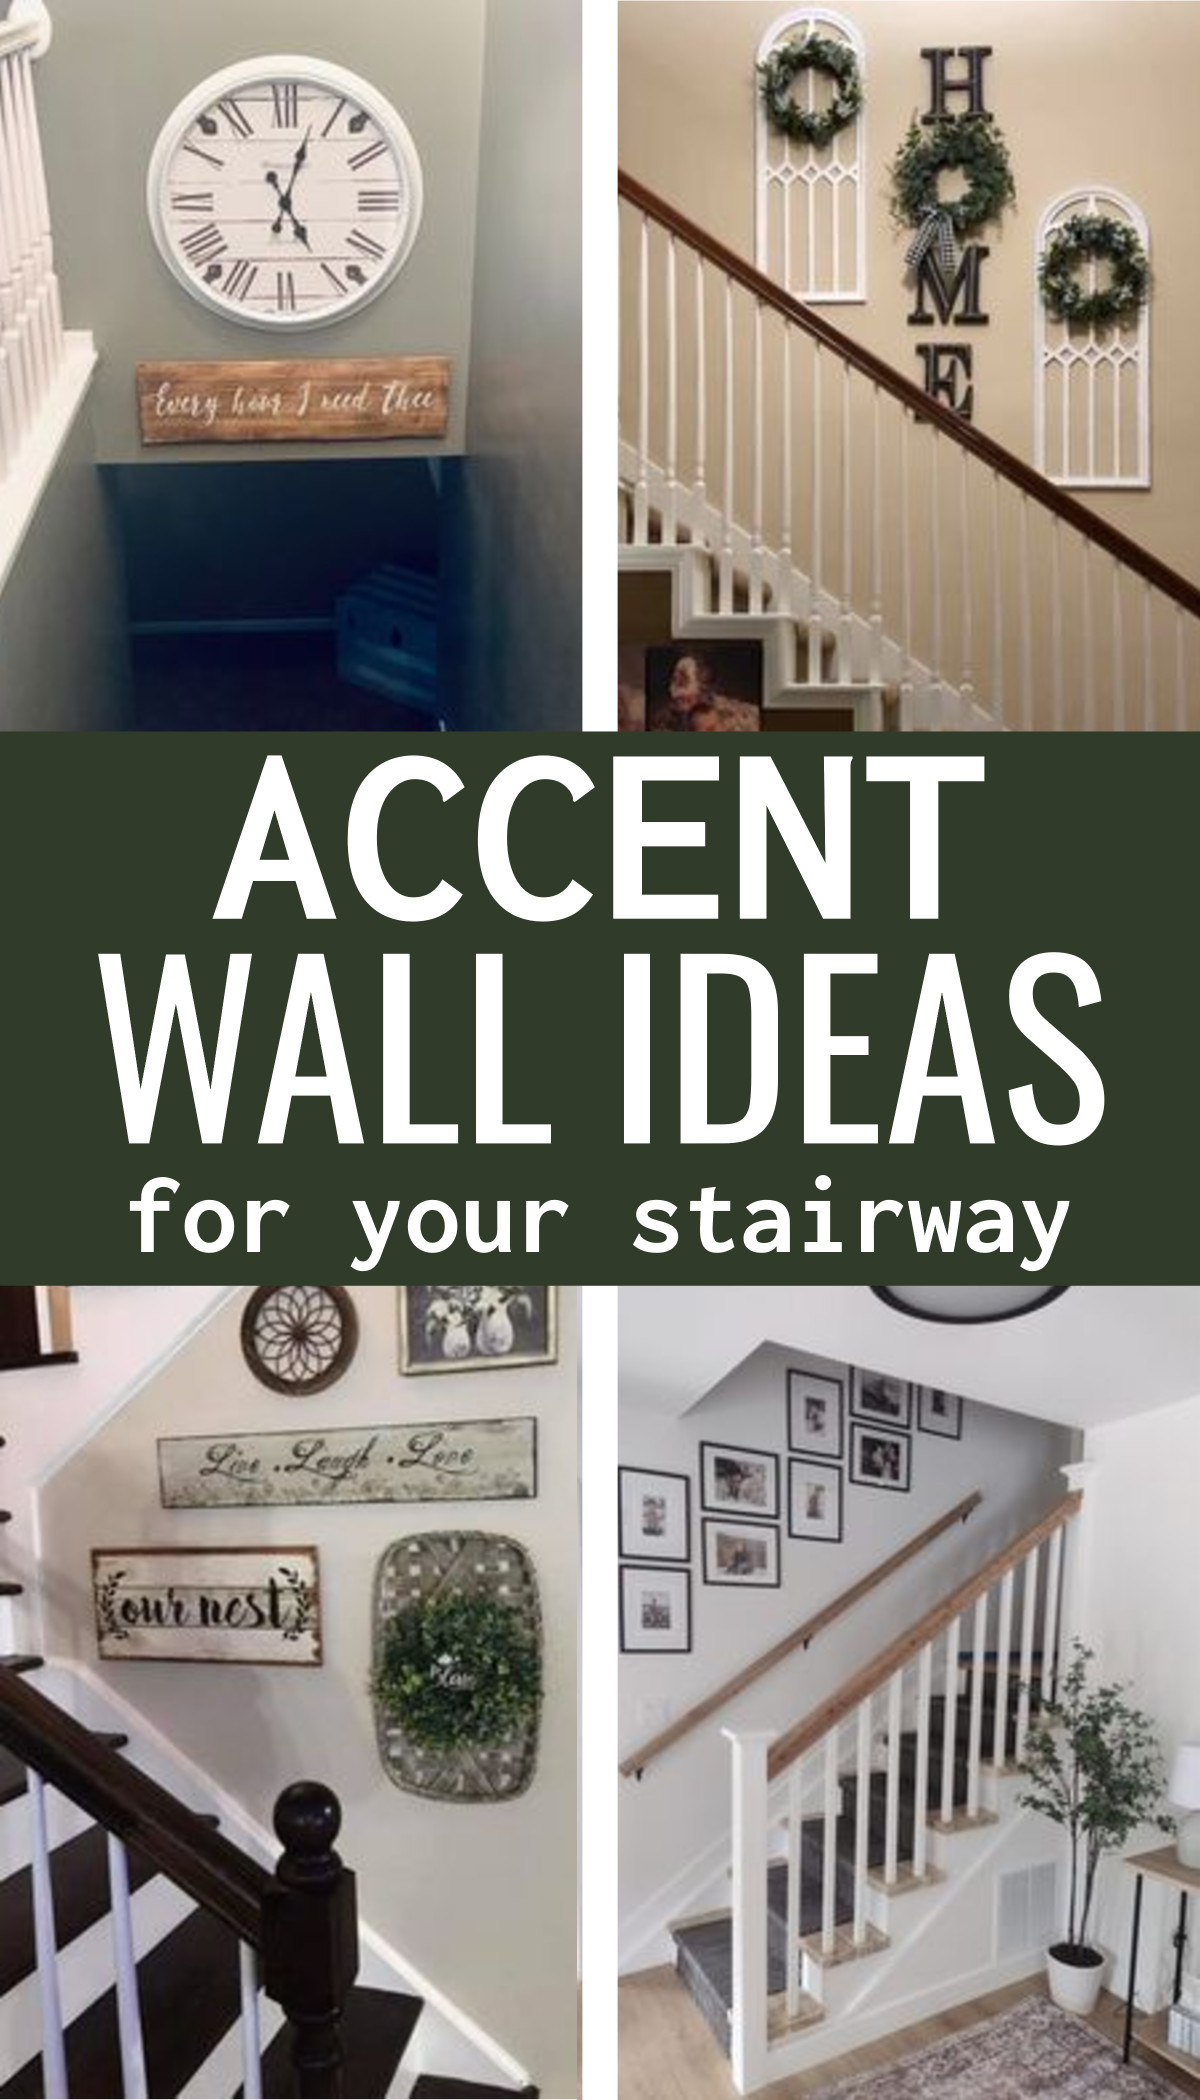 4 accent wall ideas for stairway walls